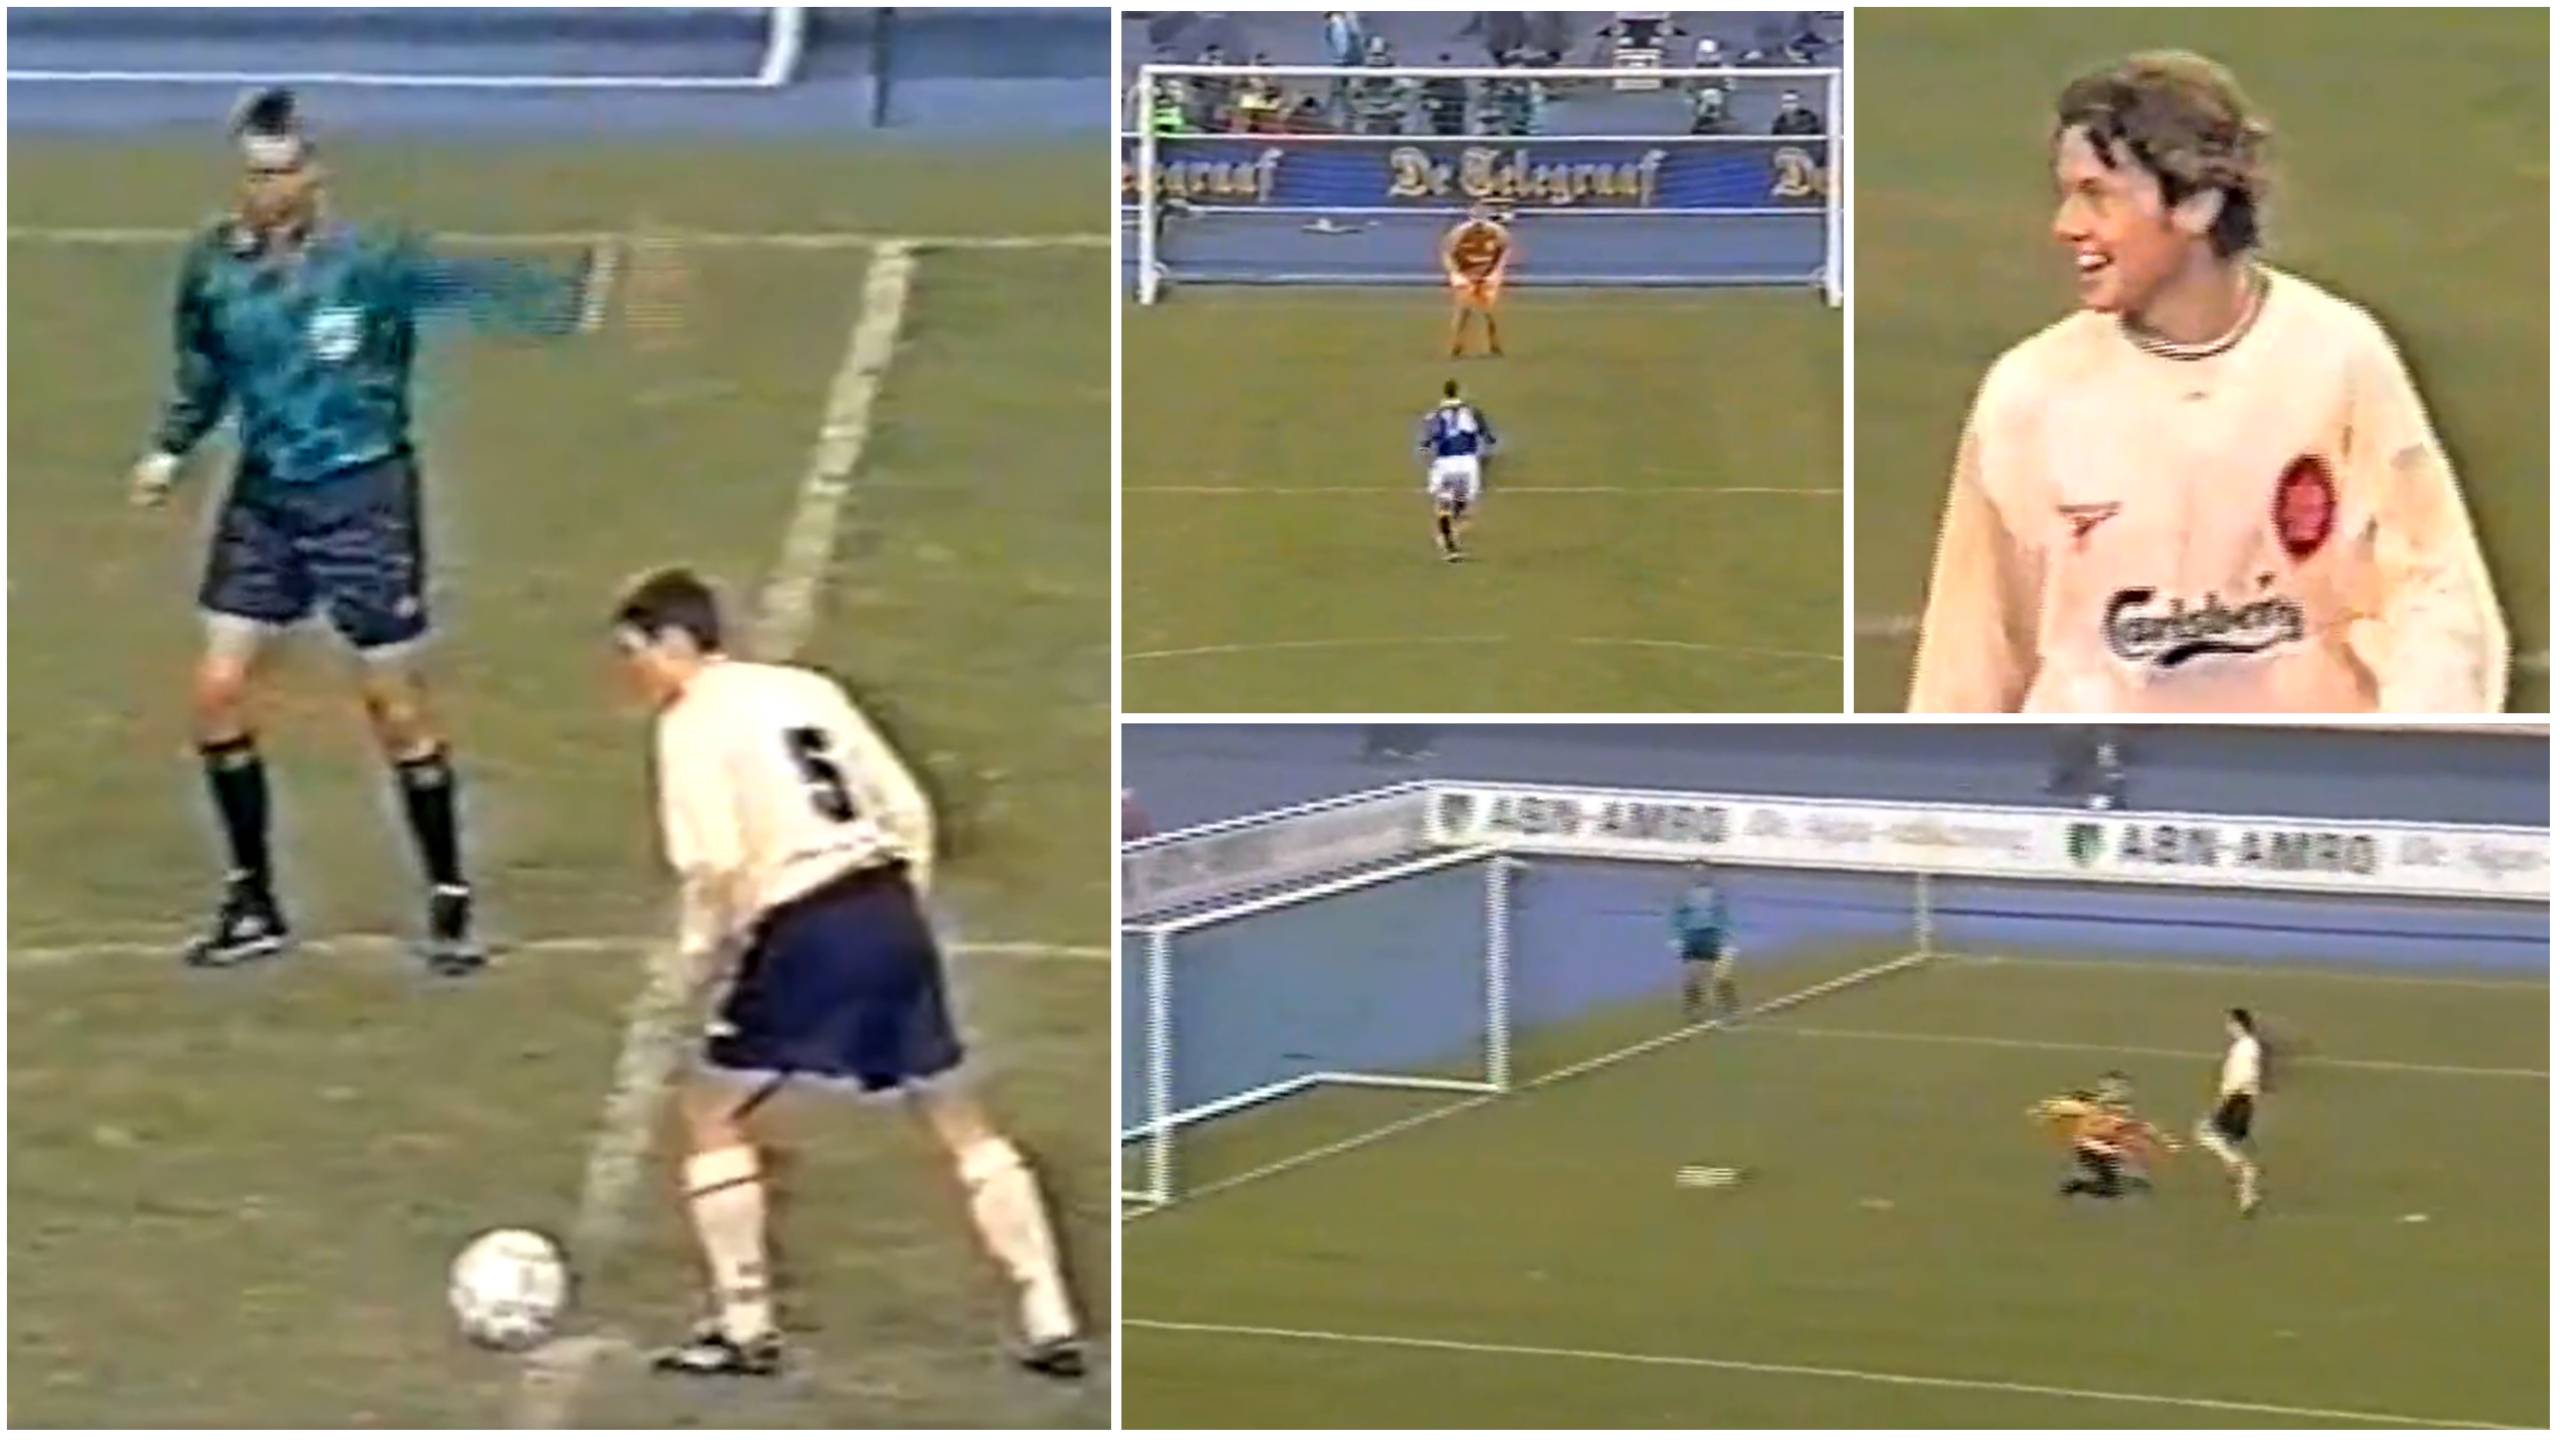 Rangers and Liverpool's bizarre '5 second to score shootout' in 1997